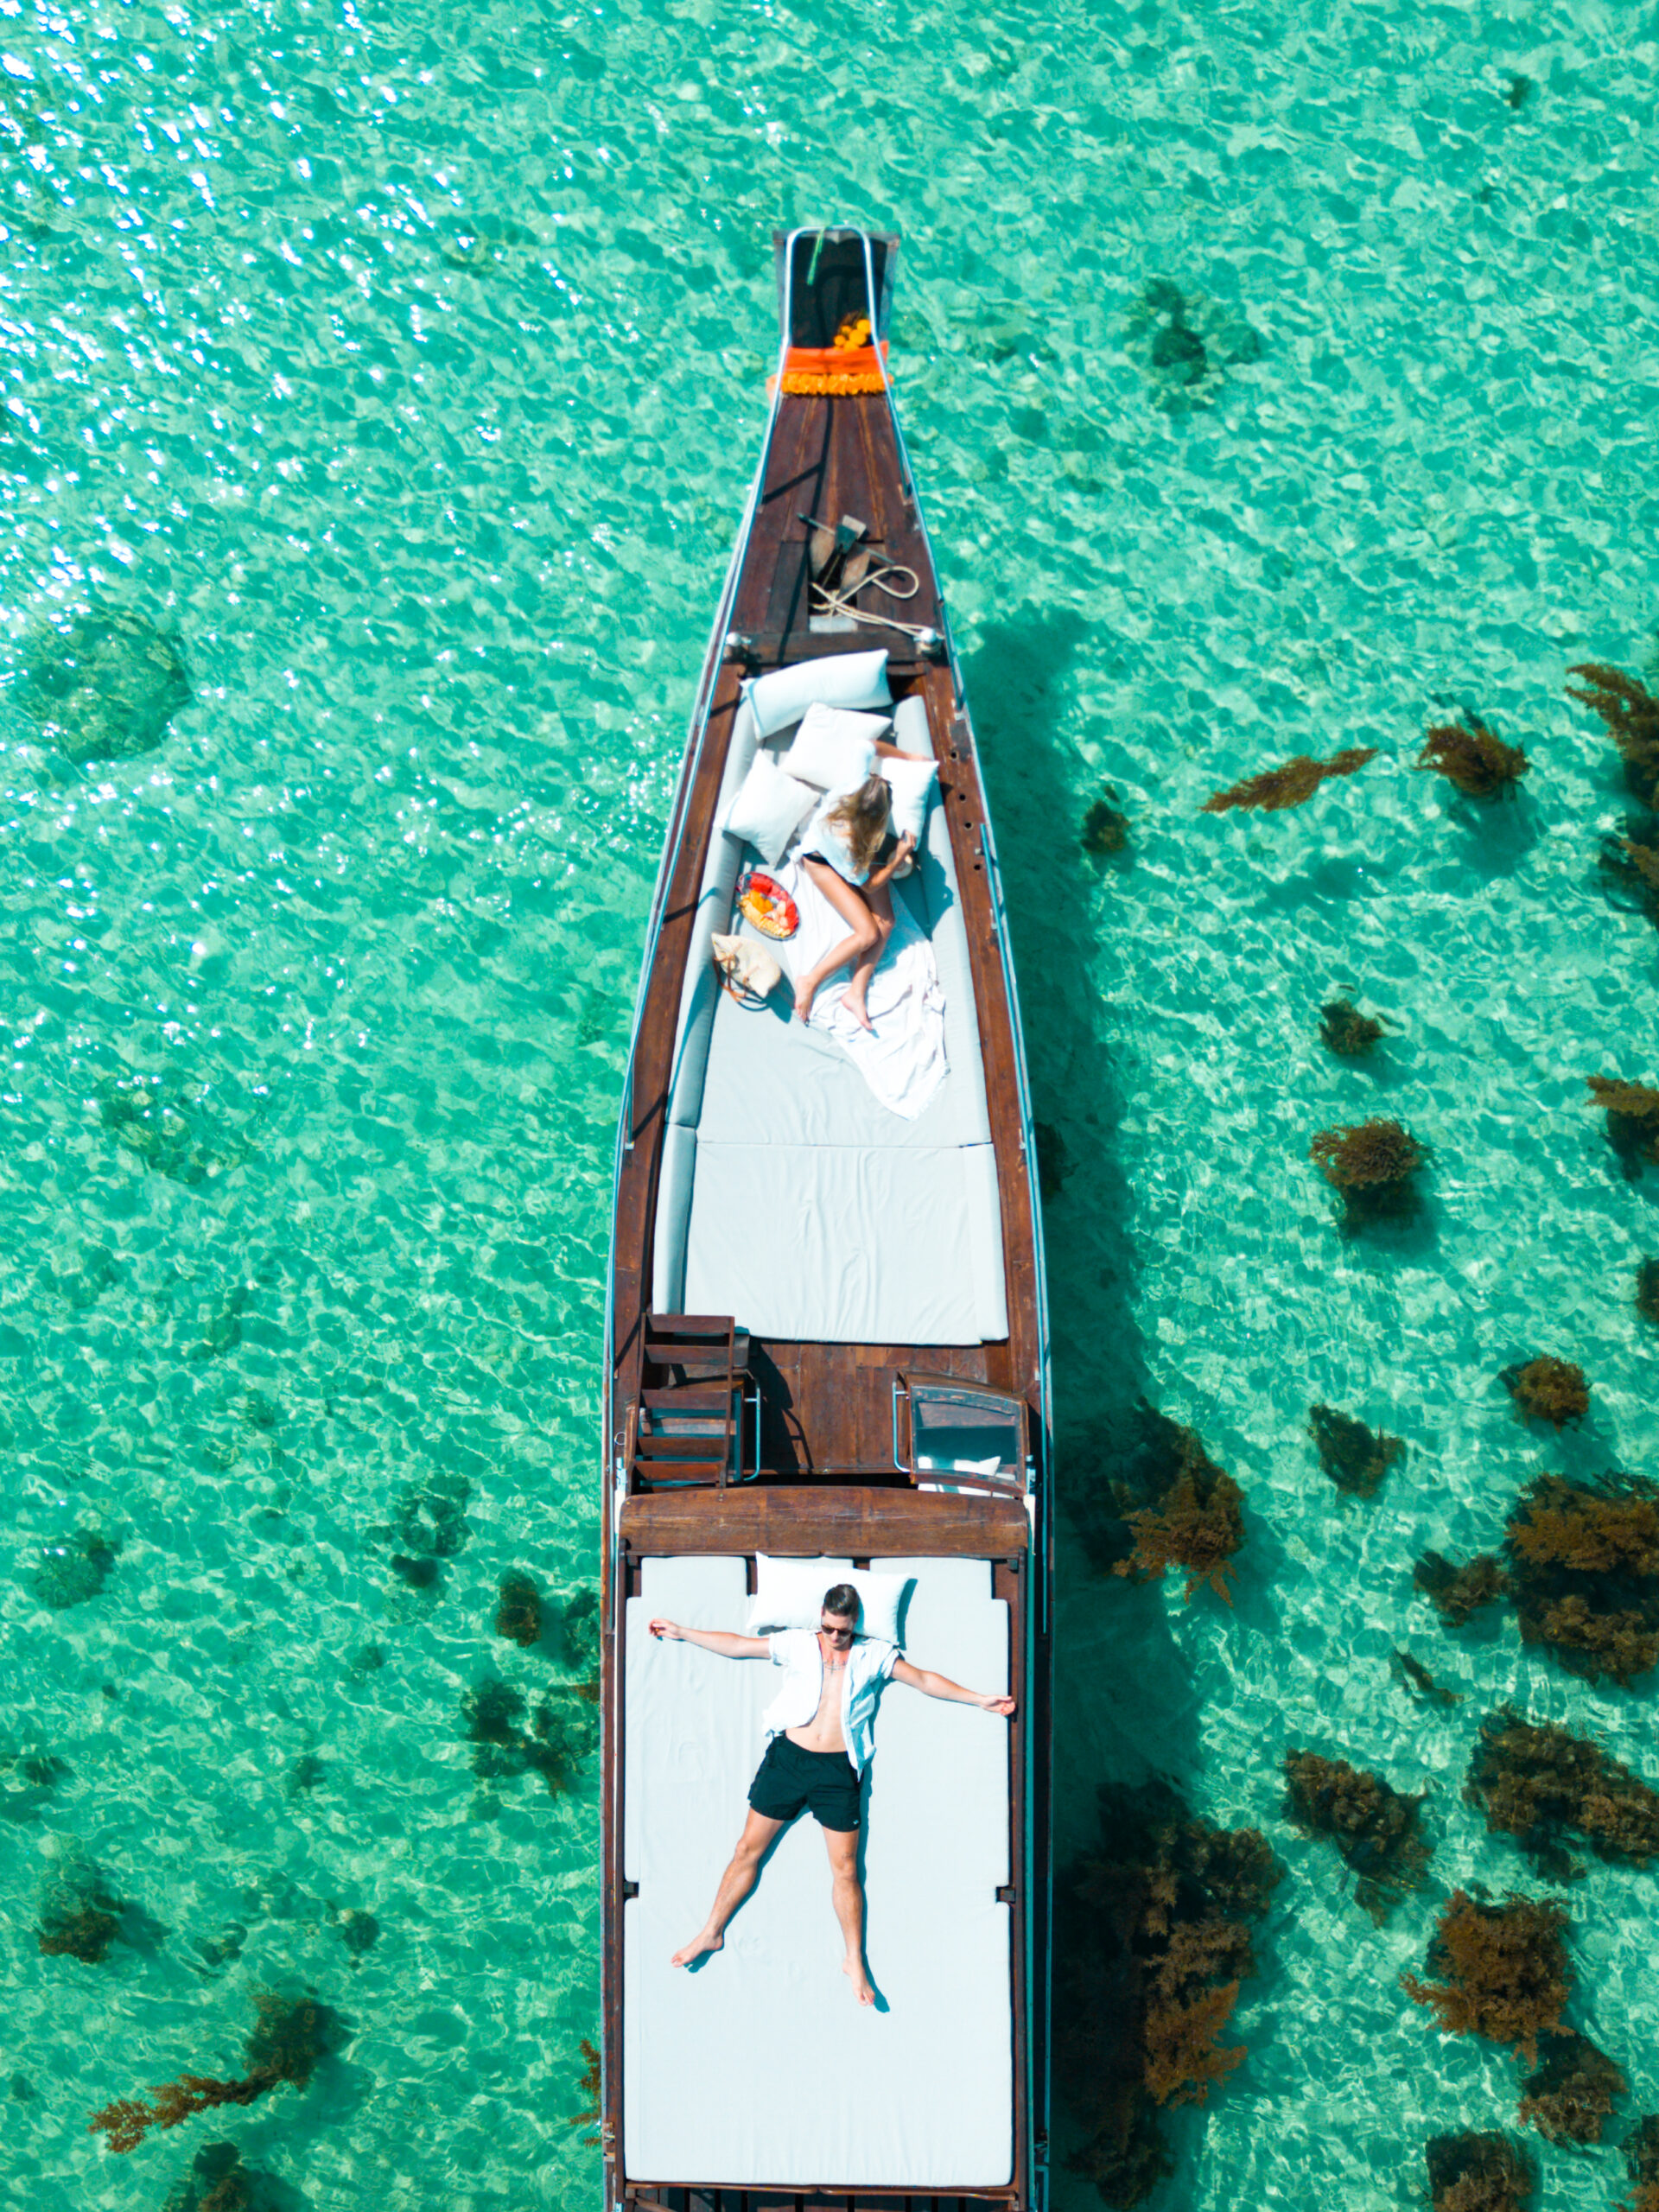 Aerial view of a long boat on clear turquoise waters with a person sunbathing and another person stretching on the deck.